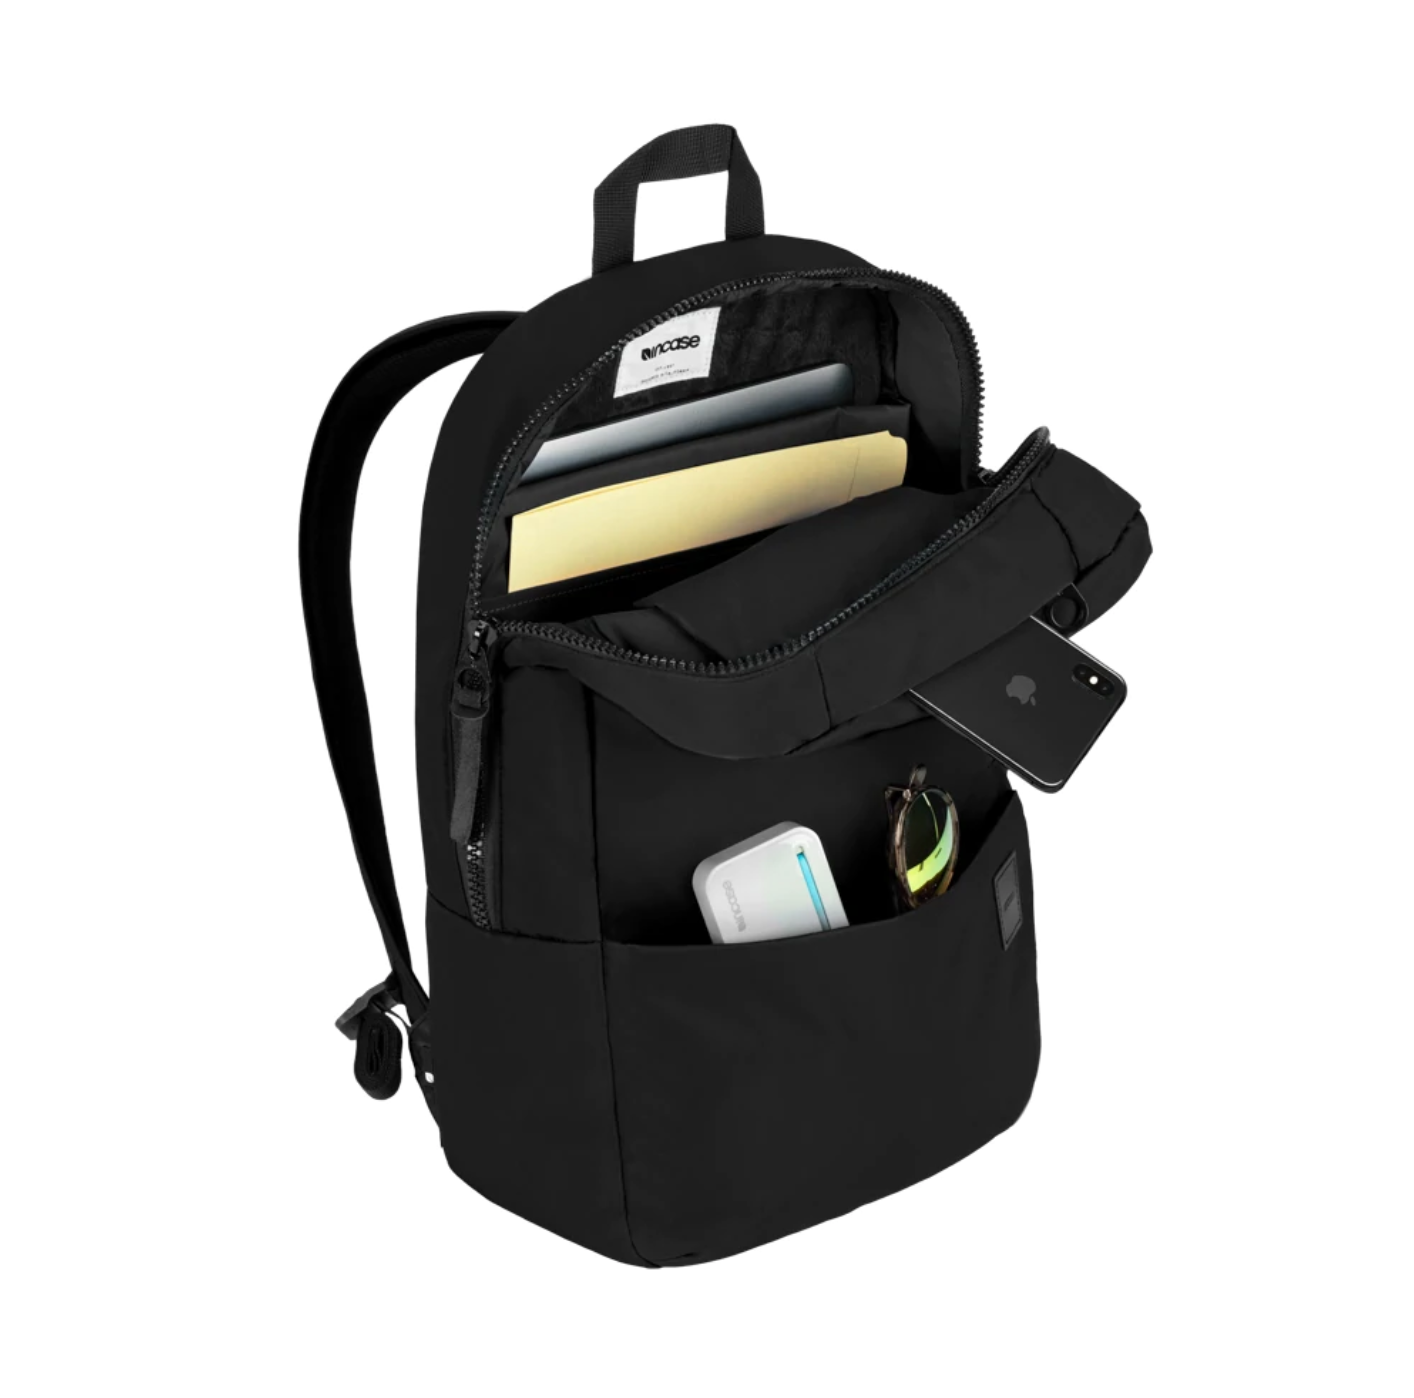 Incase Compass Backpack With Flight Nylon